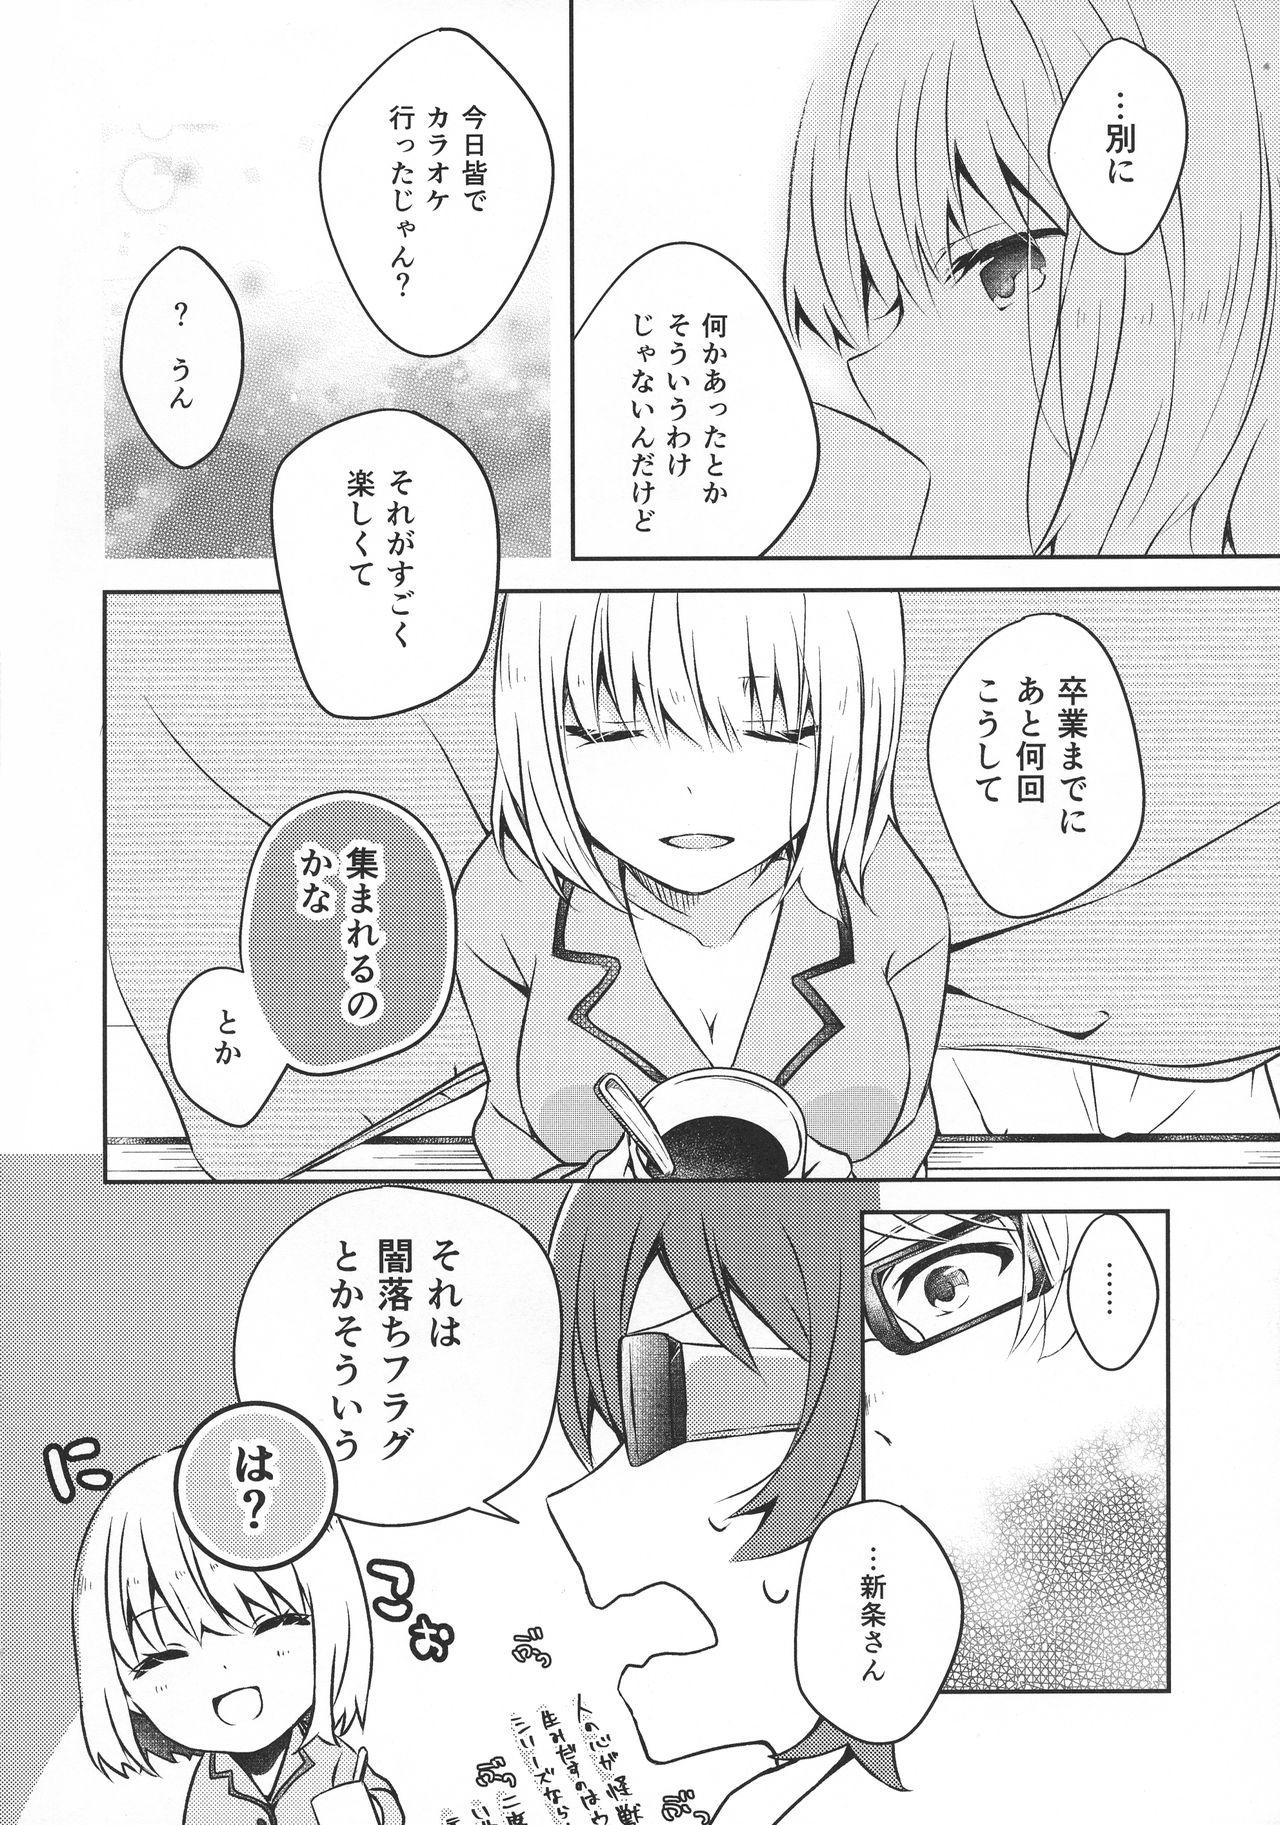 Latinos 15.15 - Ssss.gridman Stretching - Page 3